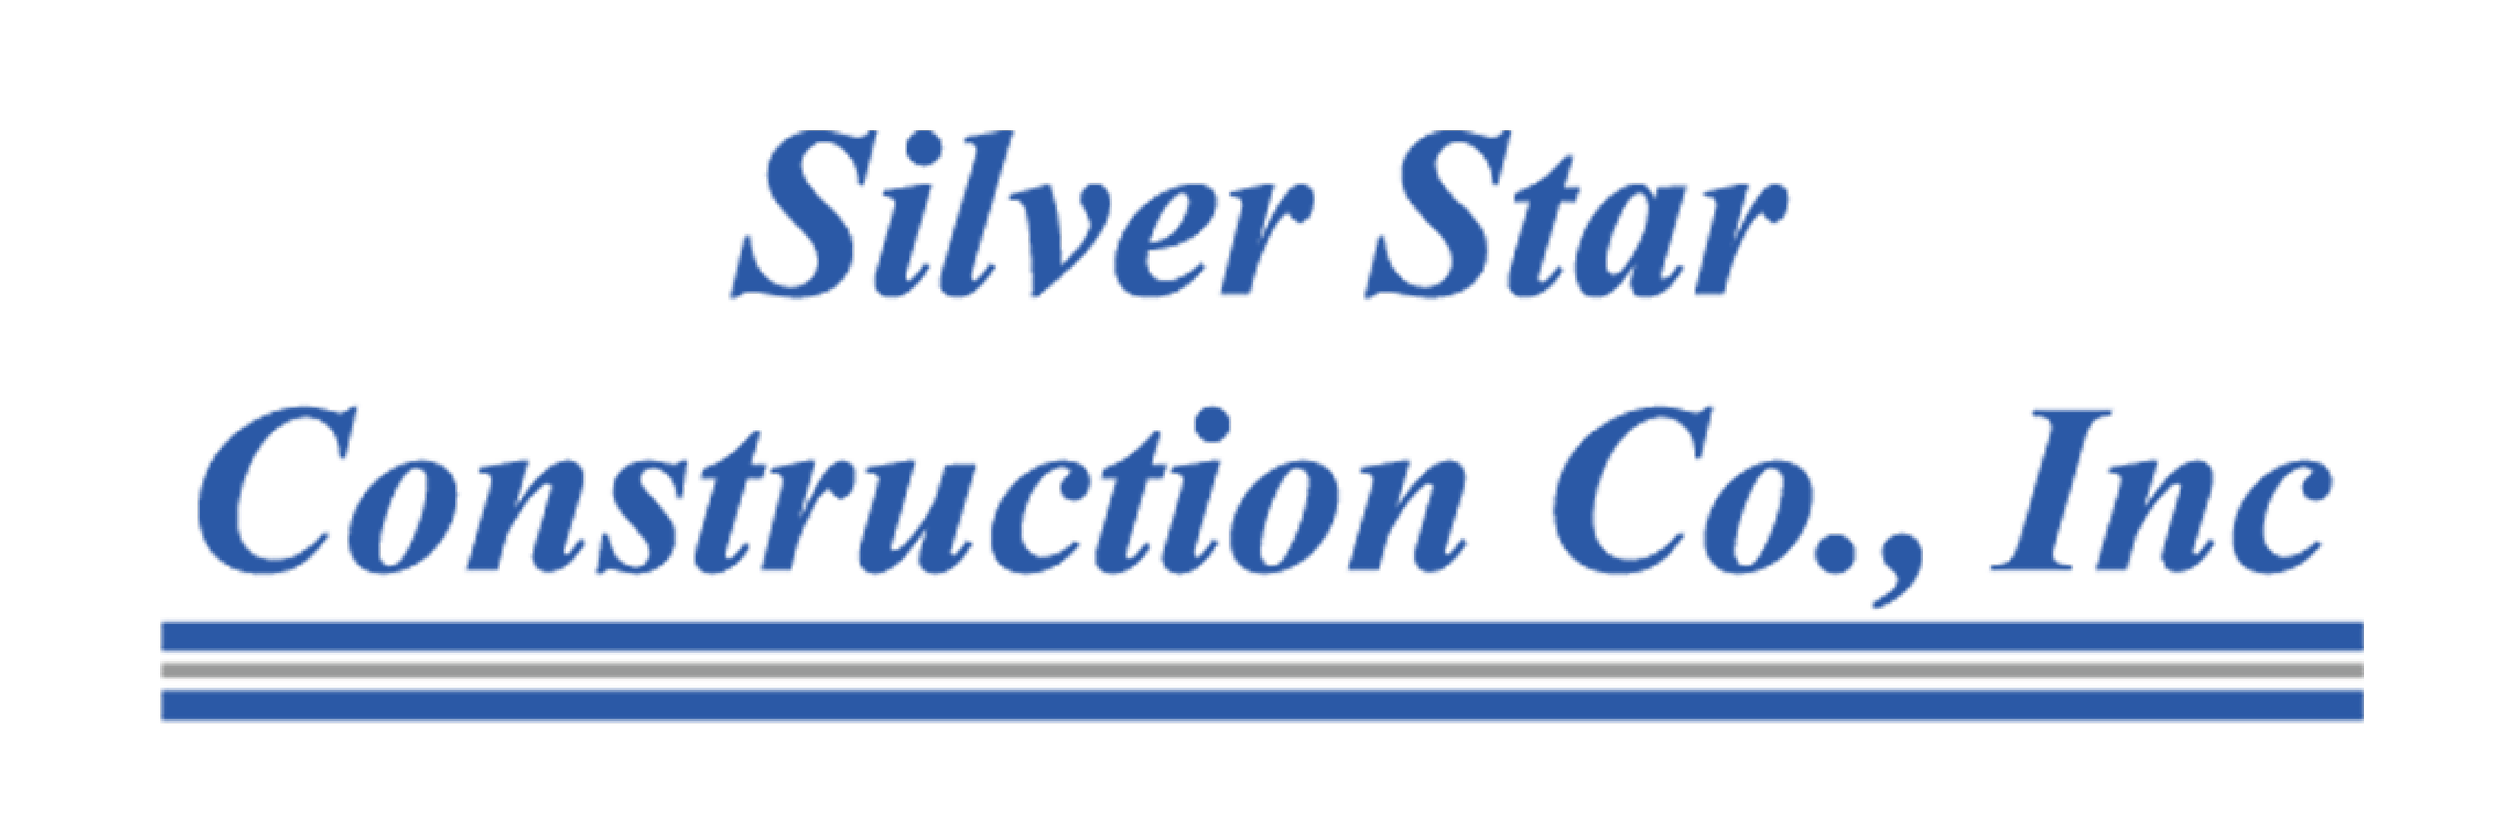 Silver Star logo.png